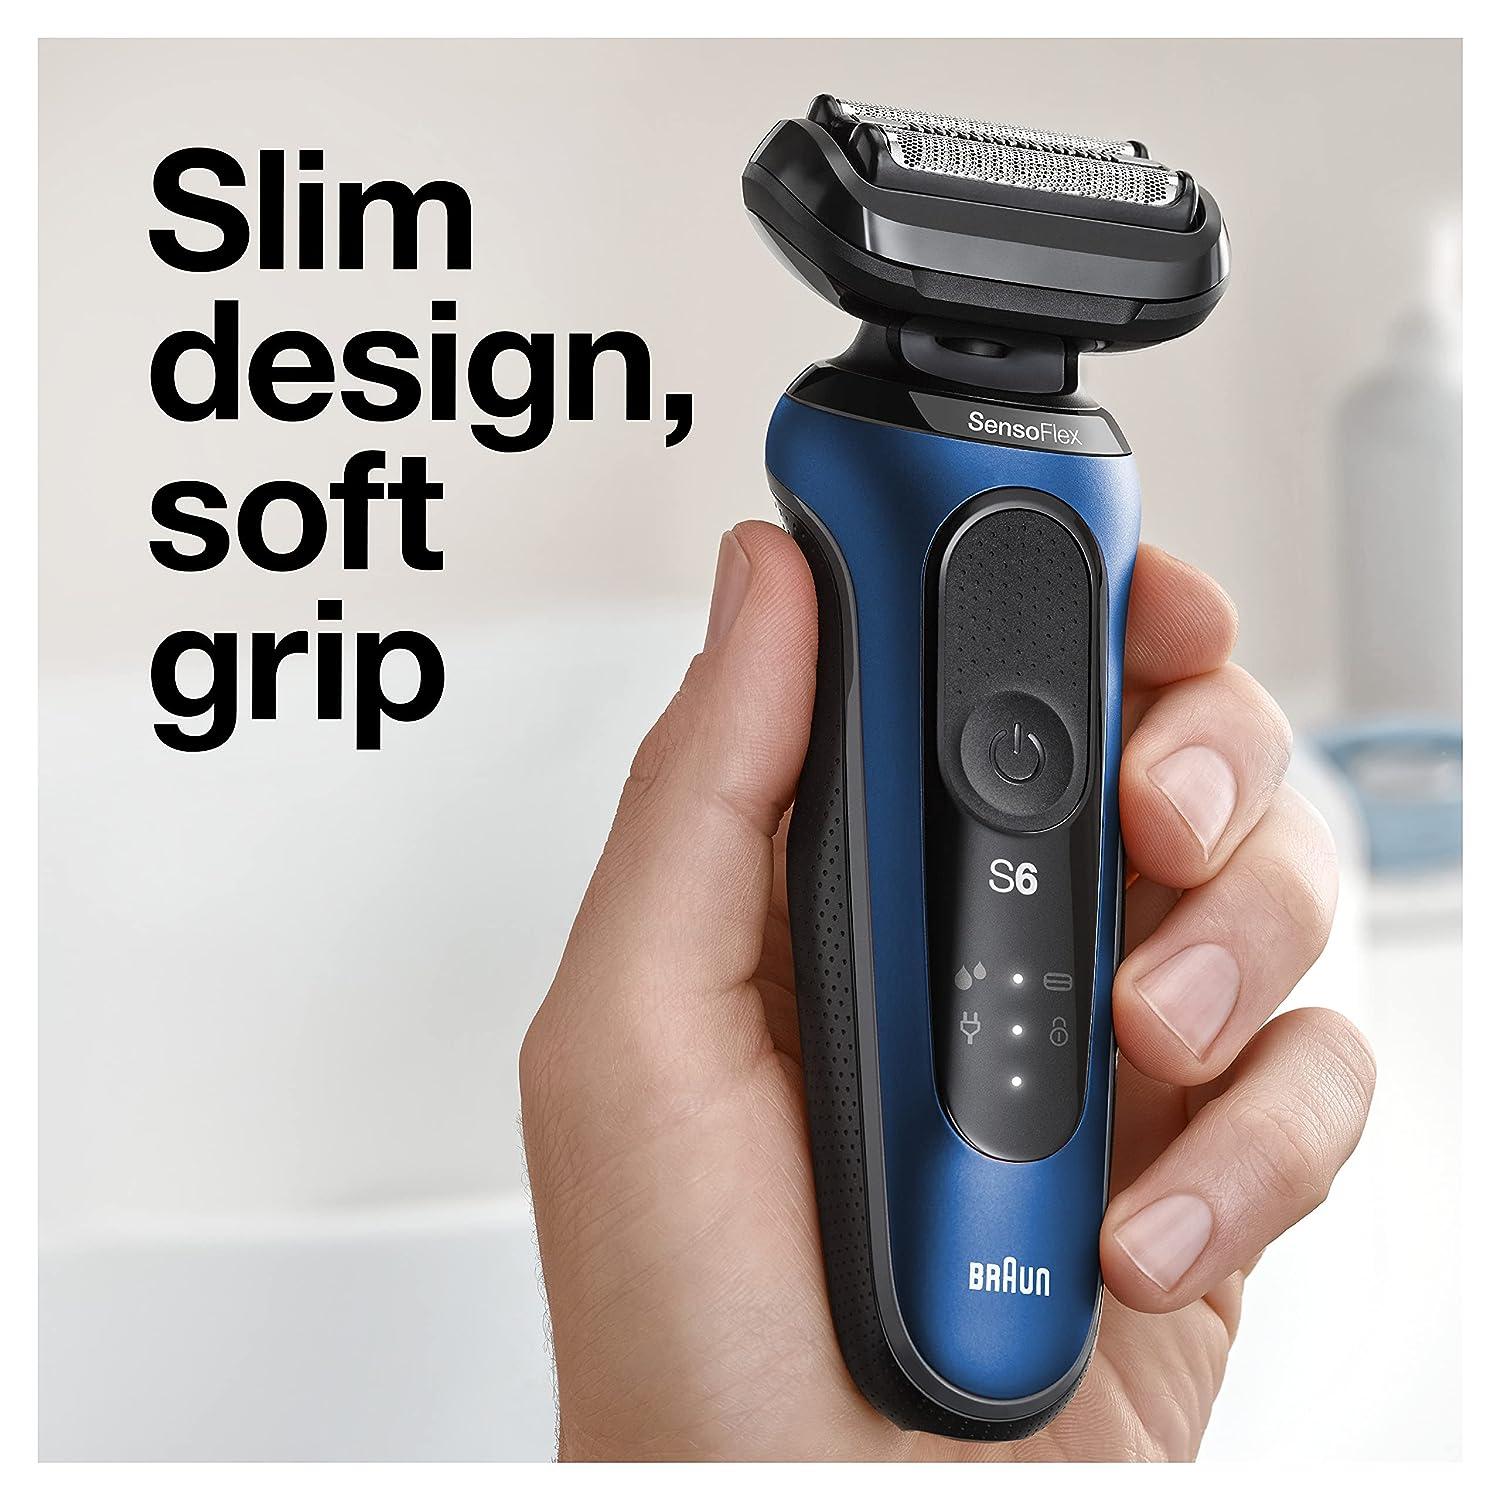 Braun Series 6 6095cc Electric Razor for Men with SmartCare Center, Beard  Trimmer, Stubble Beard Trimmer, Cleansing Brush, Wet & Dry, Rechargeable